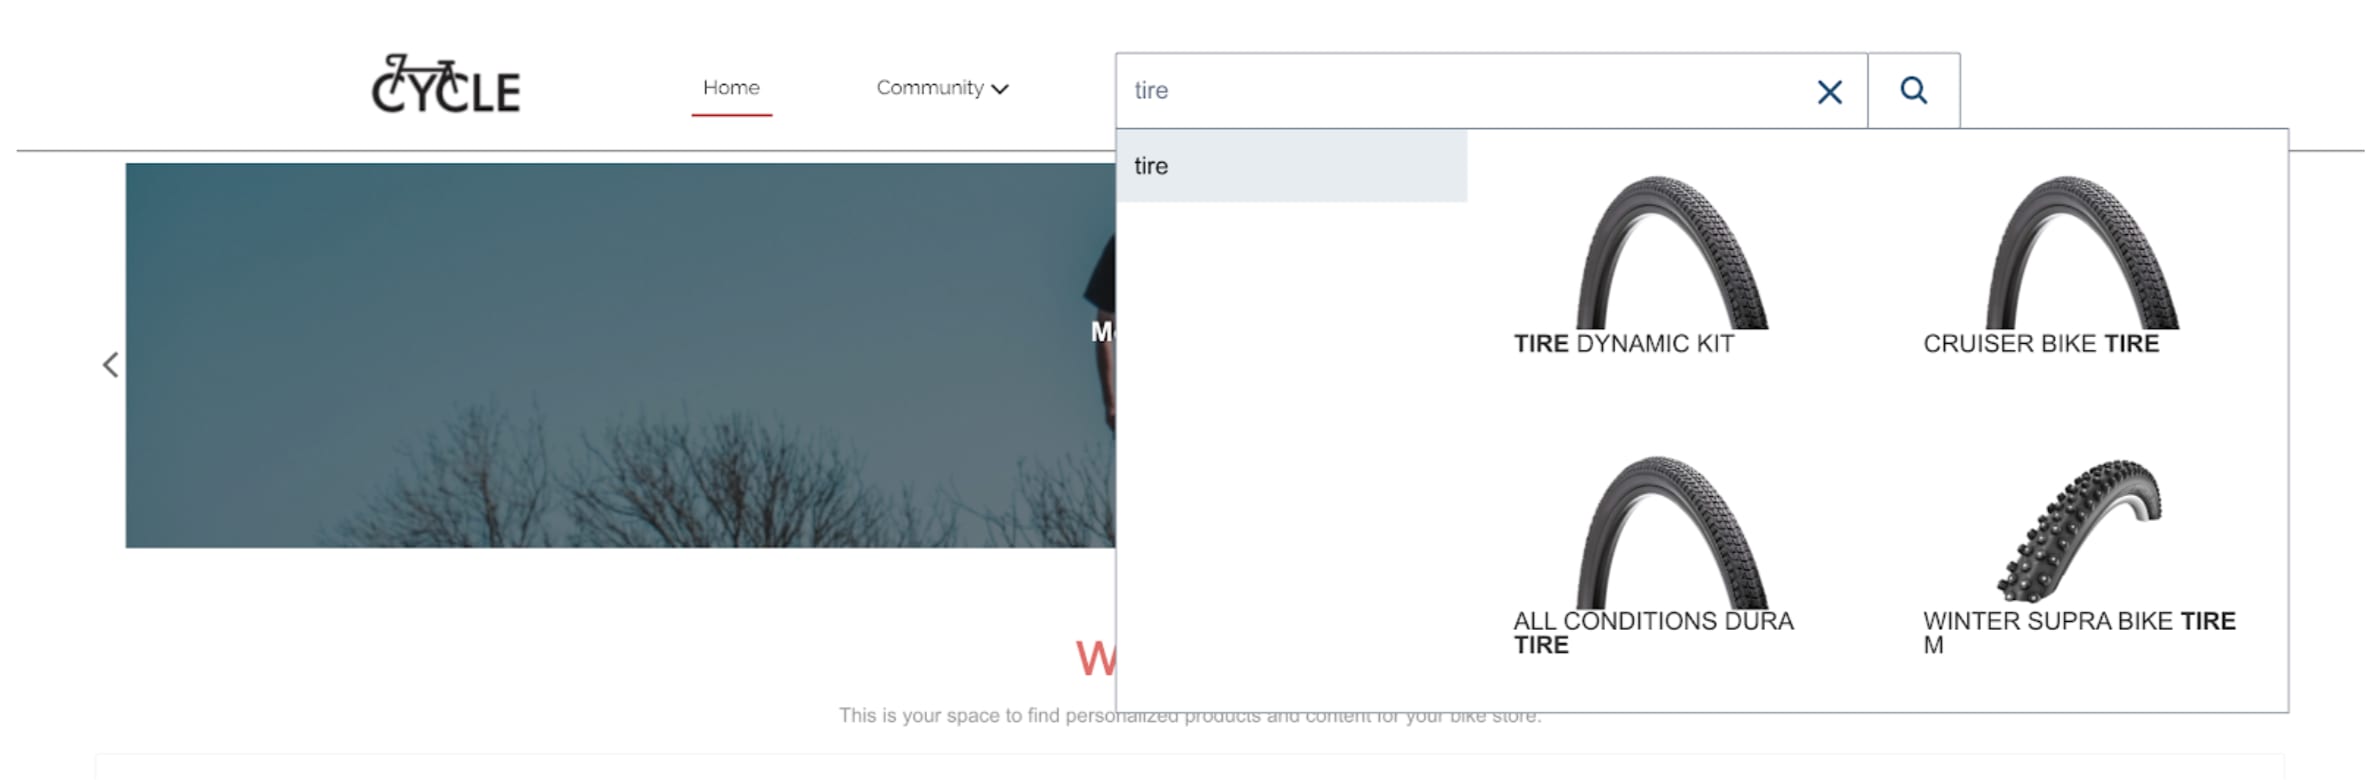 A screen capture shows a bicycle parts manufacturer website offering images of different bike tires.